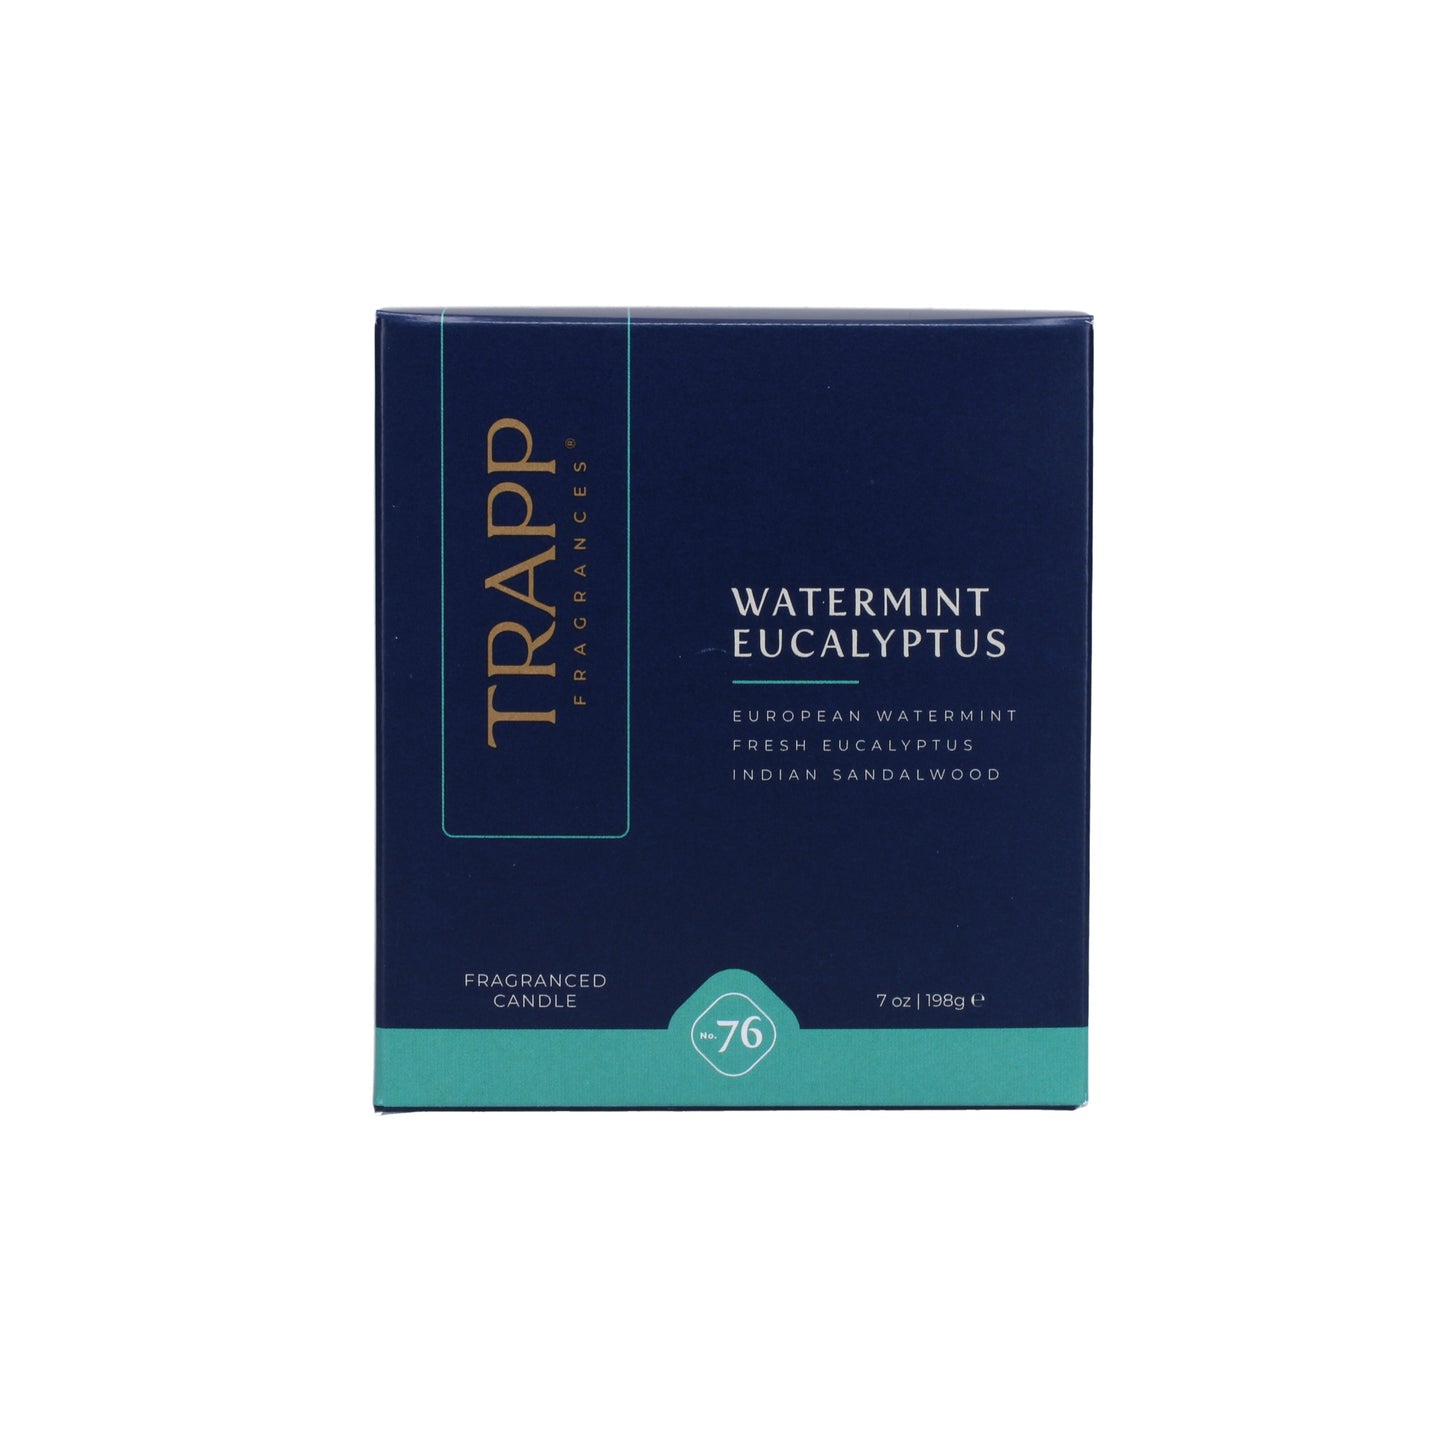 No. 76 Watermint Eucalyptus 7 oz. Candle in Signature Box Image 3